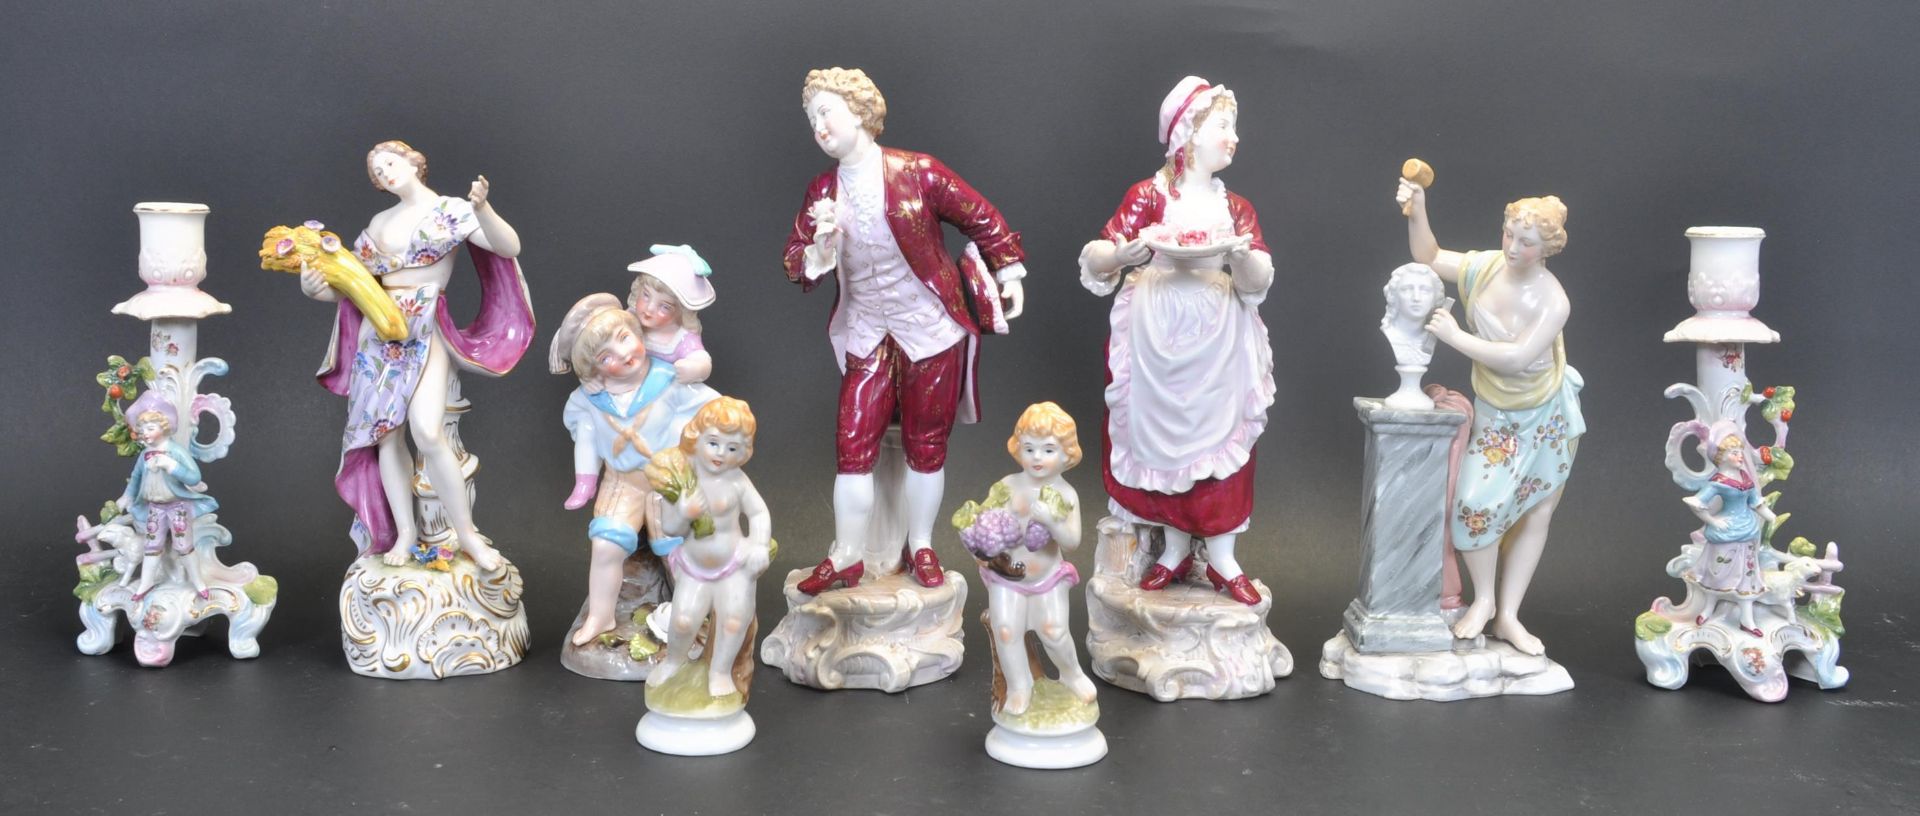 GRAOUP OF NINE PORCELAIN NEOCLASSICAL GERMAN FIGURINES